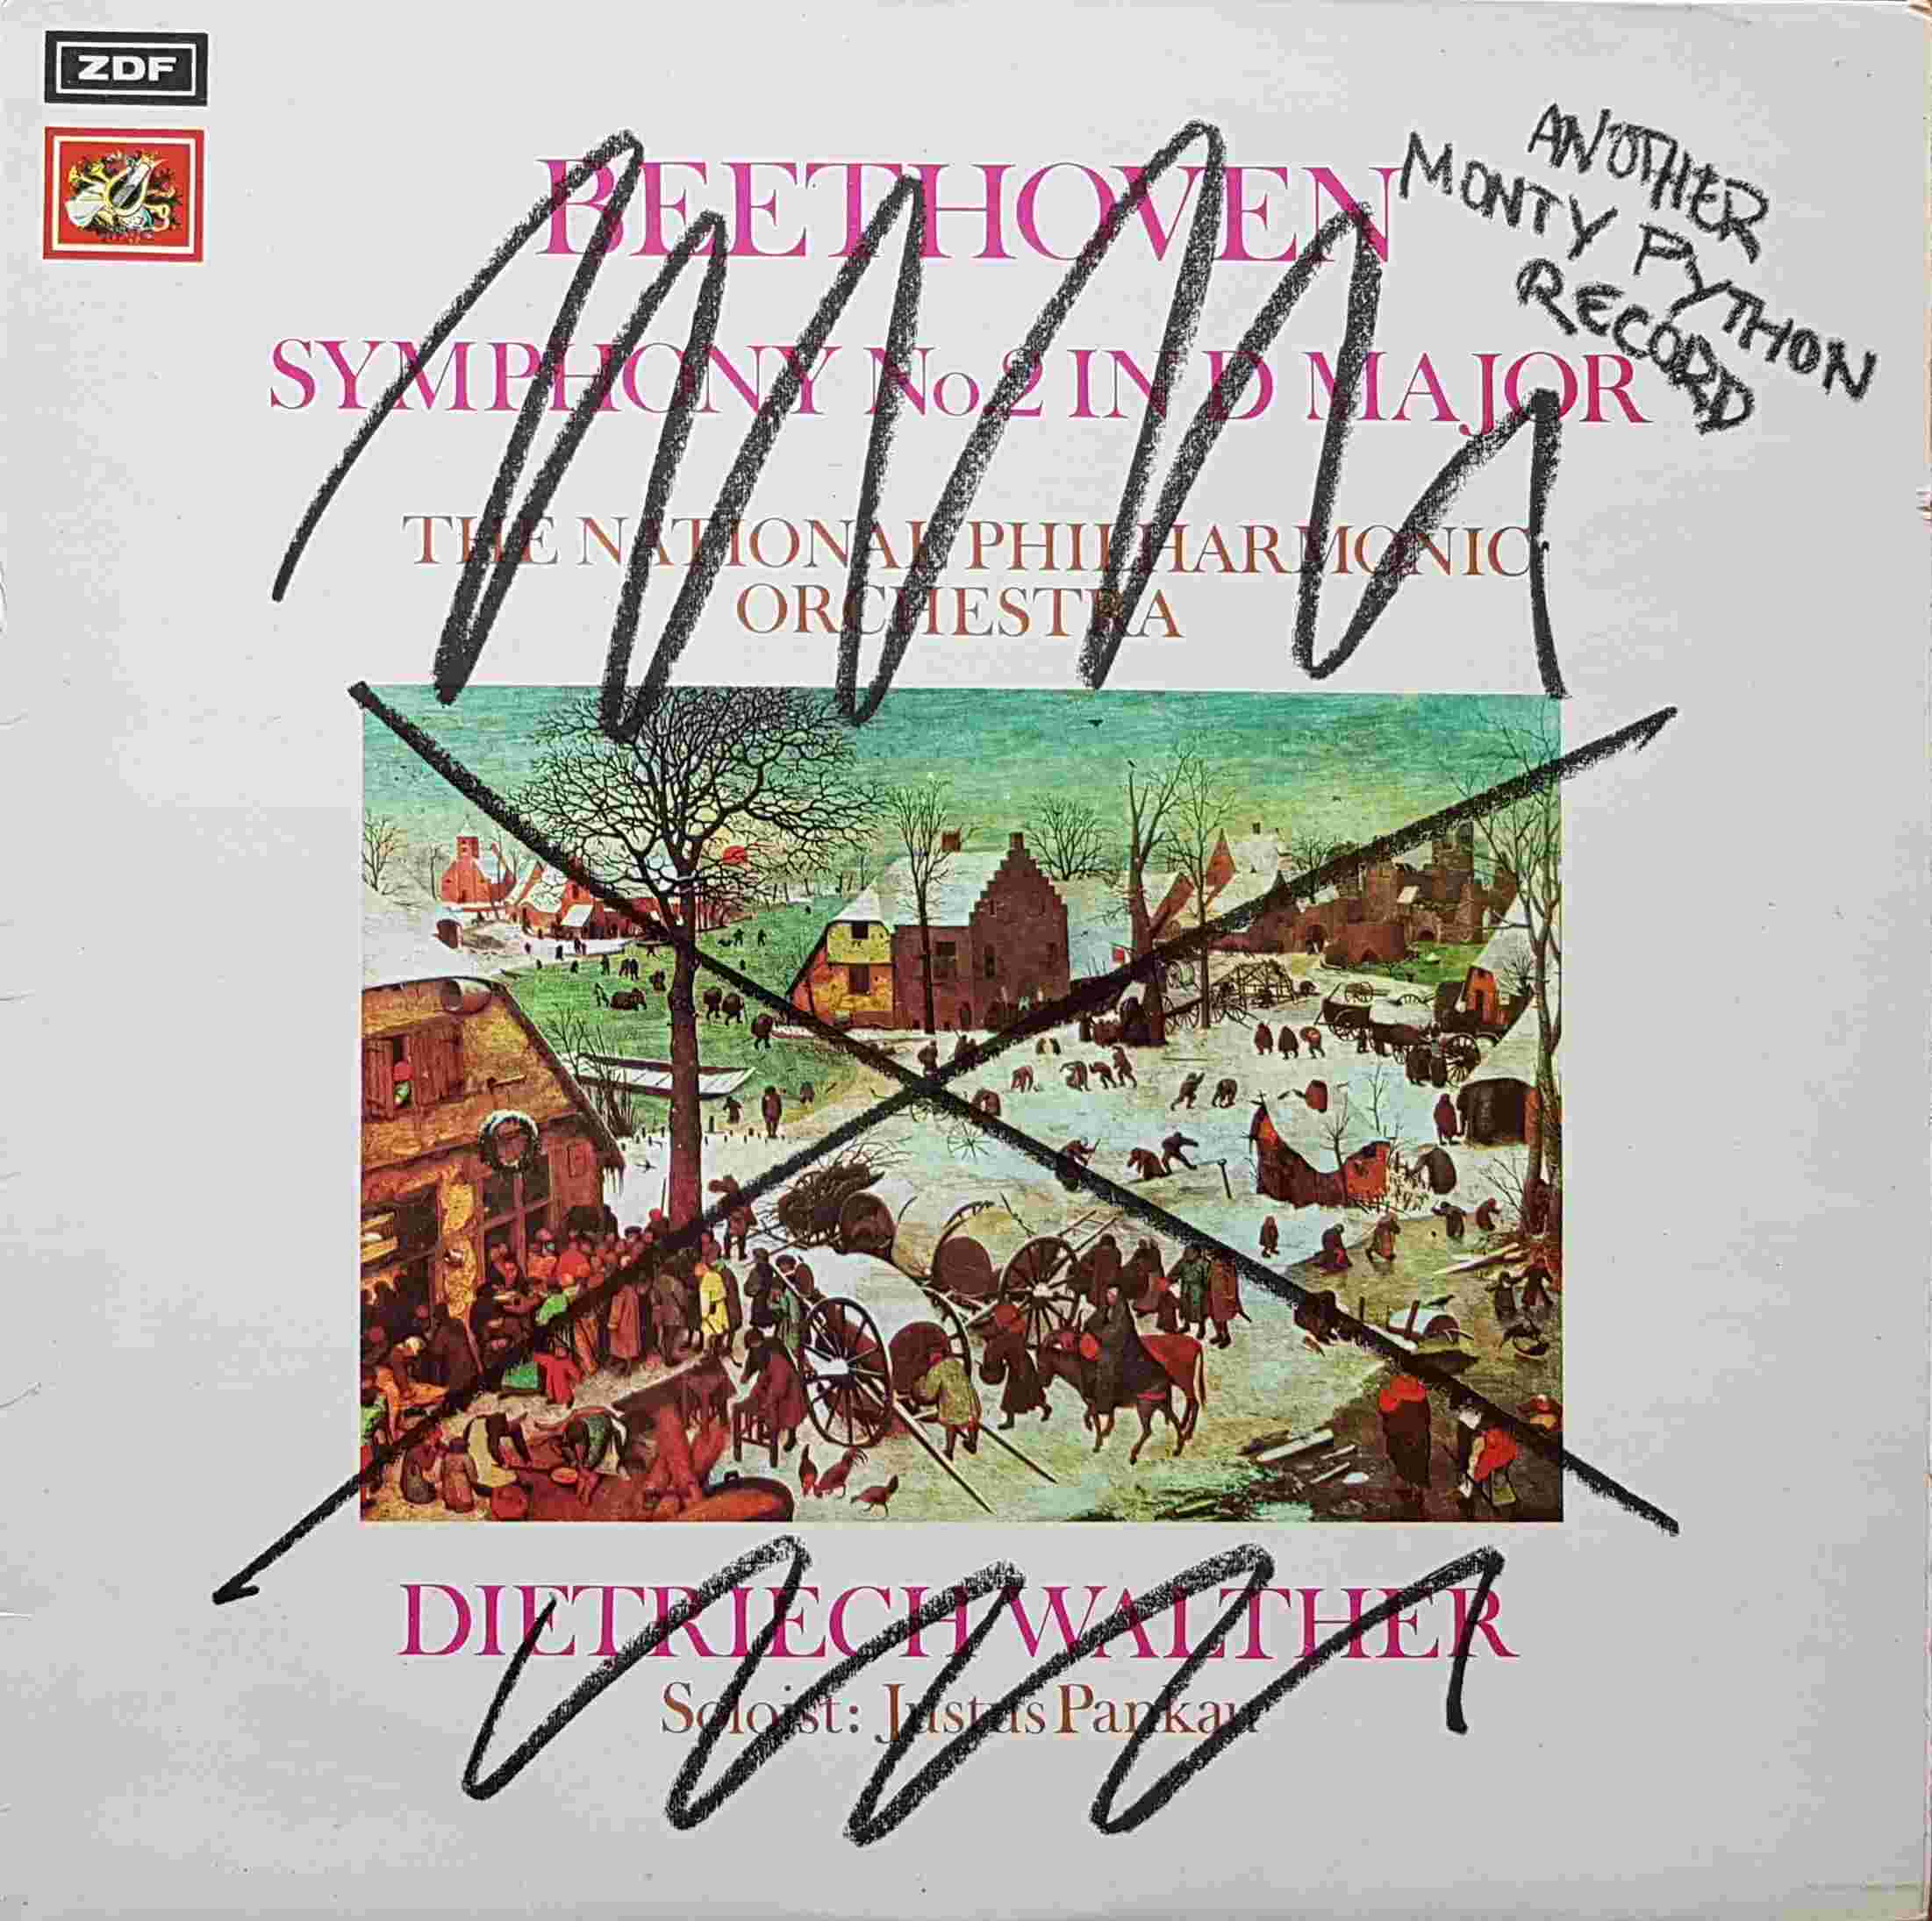 Picture of CAS 1049 Another Monty Python record (Includes 3 inserts) by artist Monty Python from the BBC albums - Records and Tapes library